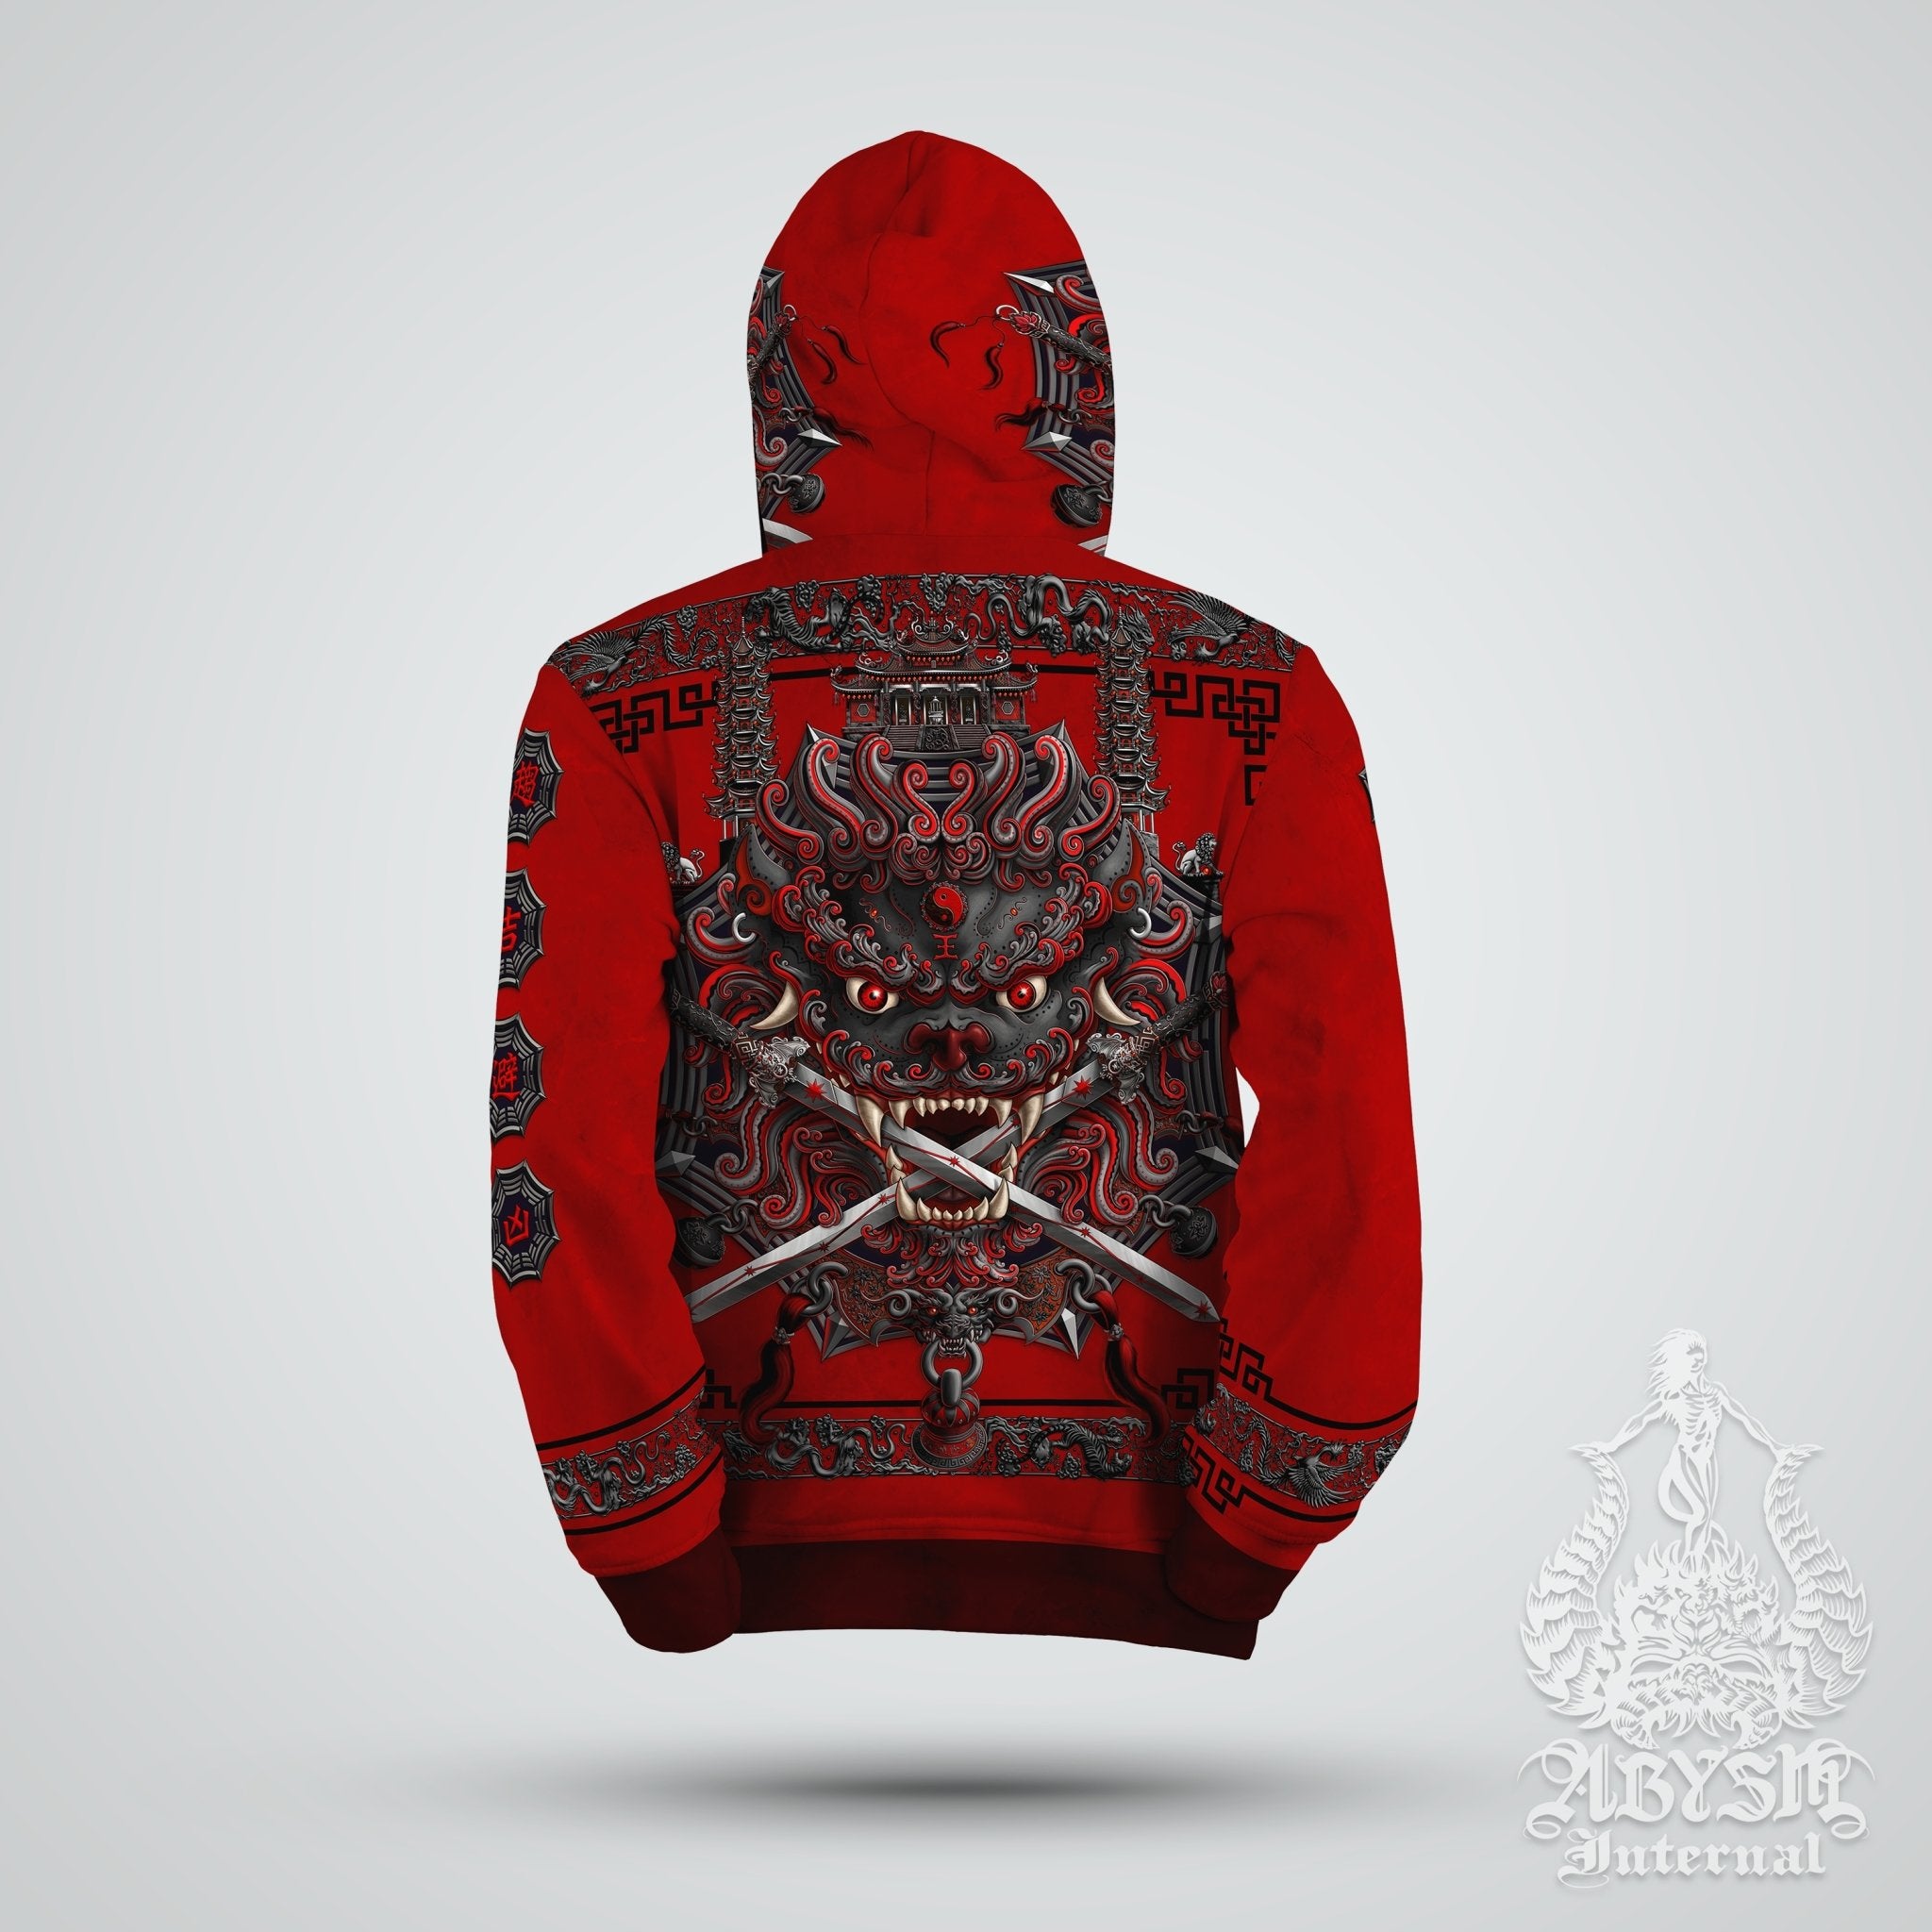 Lion Hoodie, Street Outfit, Chinese Streetwear, Taiwan Sword Lion, Asian Art Apparel, Alternative Clothing, Unisex - Bloody Gothic - Abysm Internal